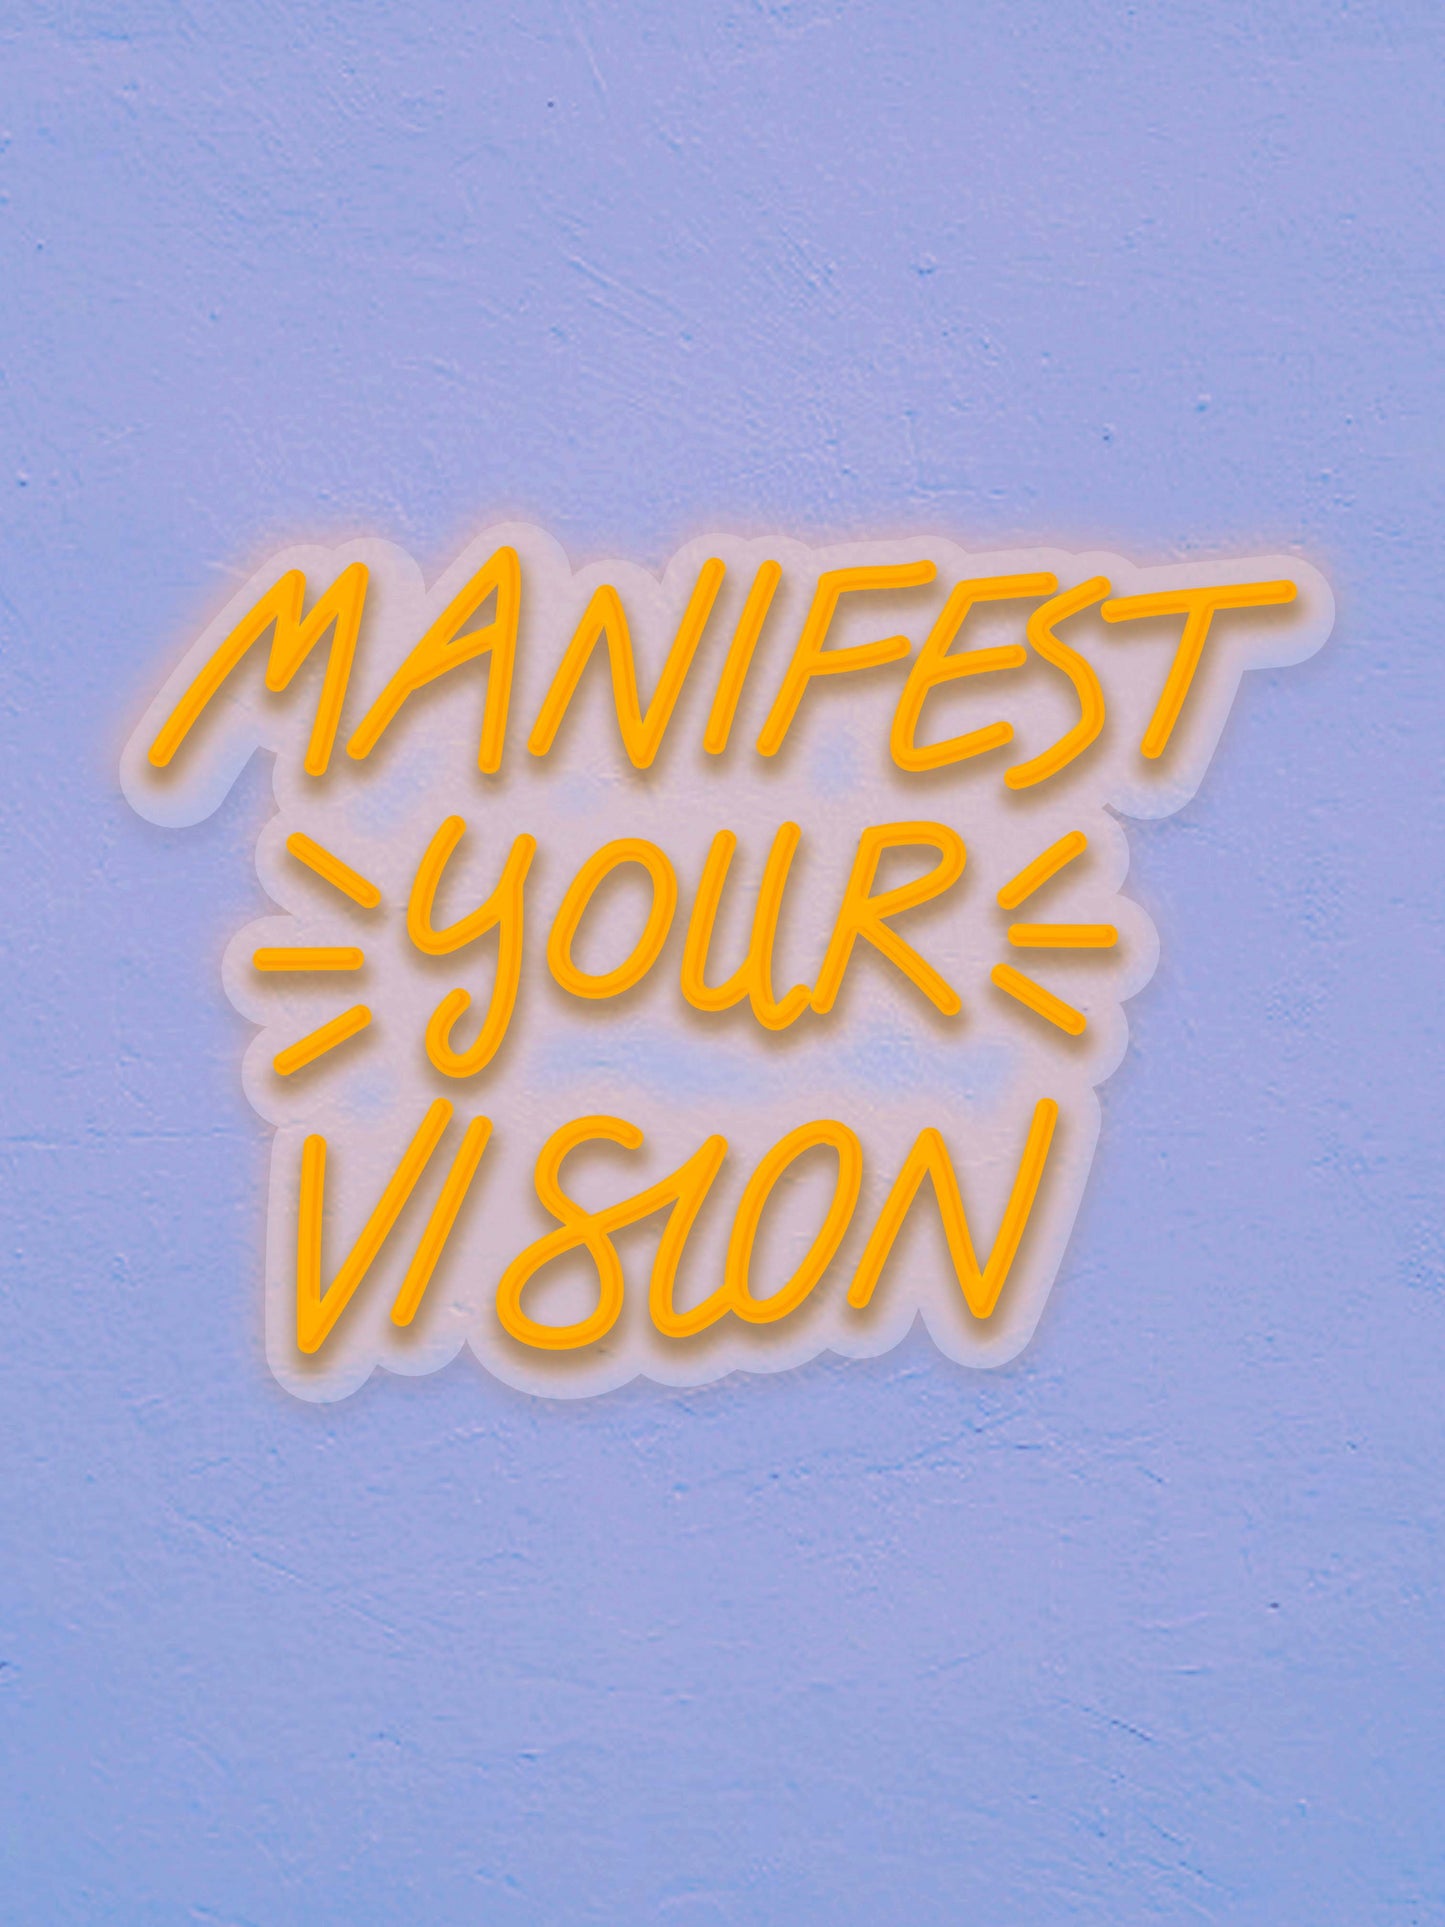 Manifest your vision